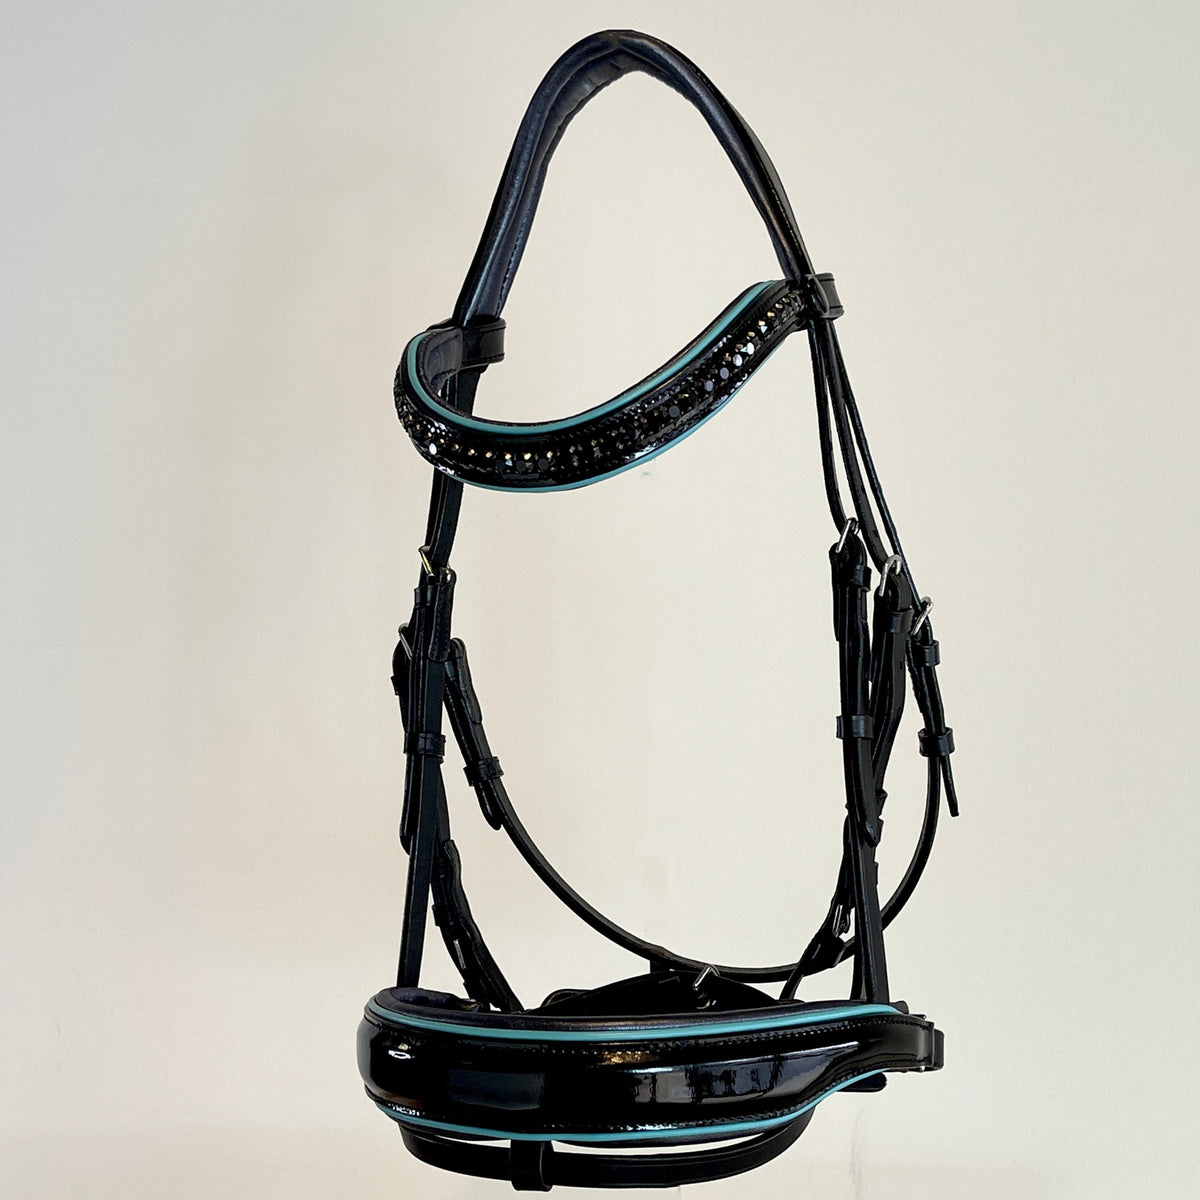 The Obsidian Snaffle Bridle